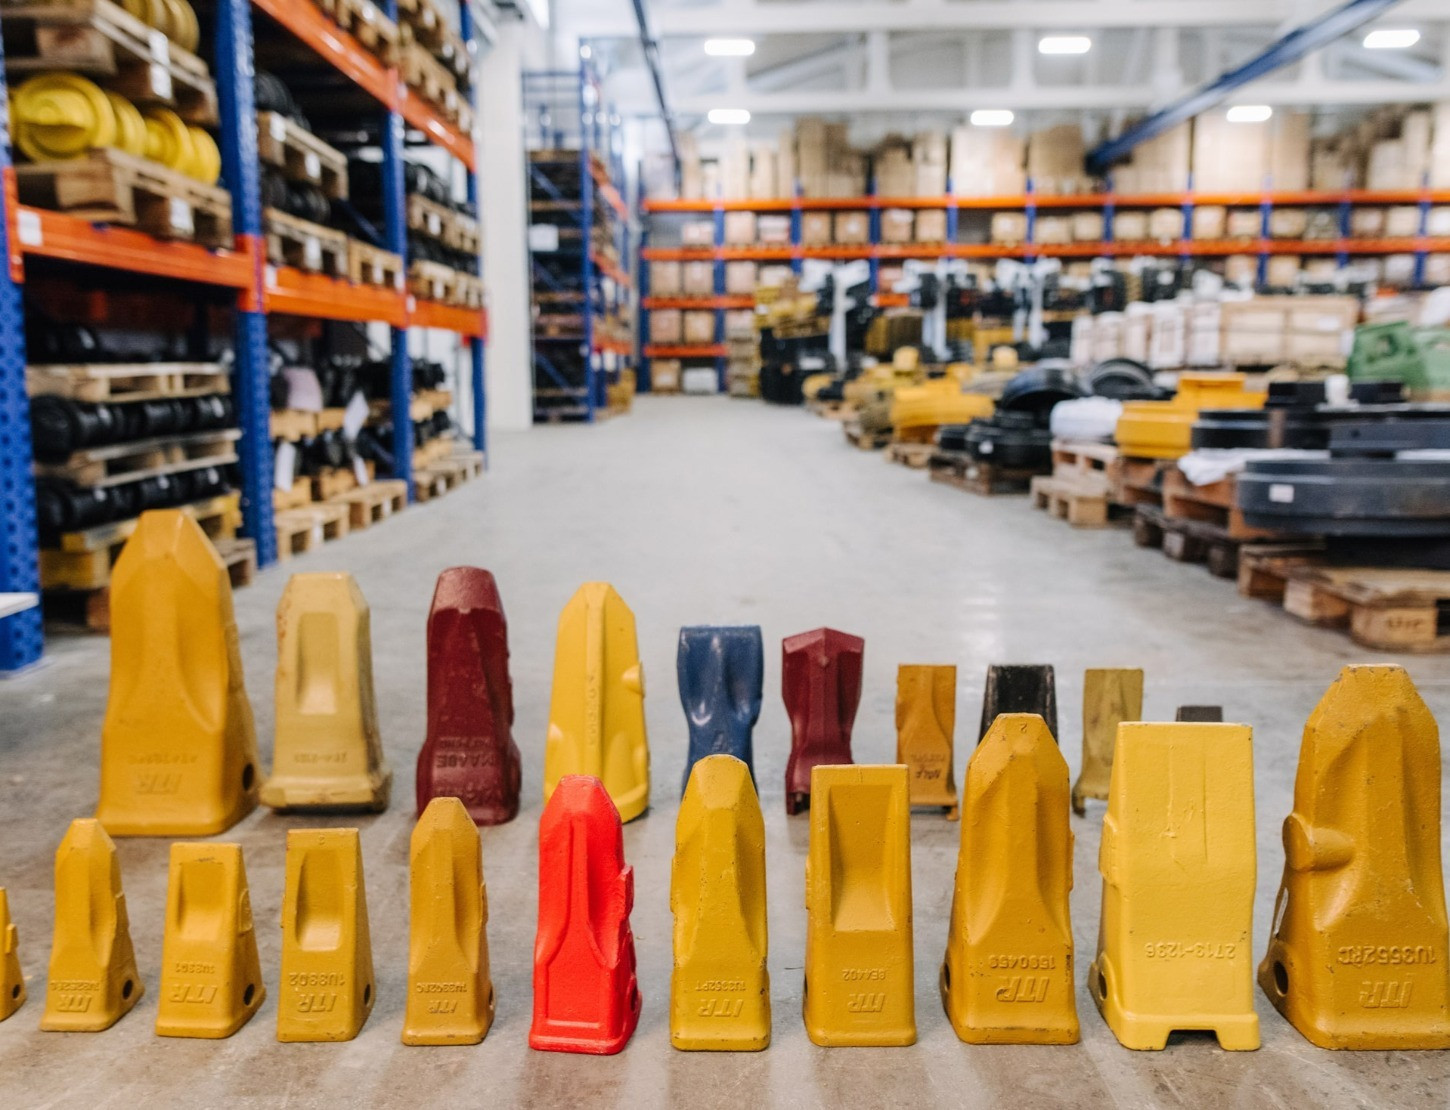 A wide range of the parts for a wide range of construction and heavy machinery